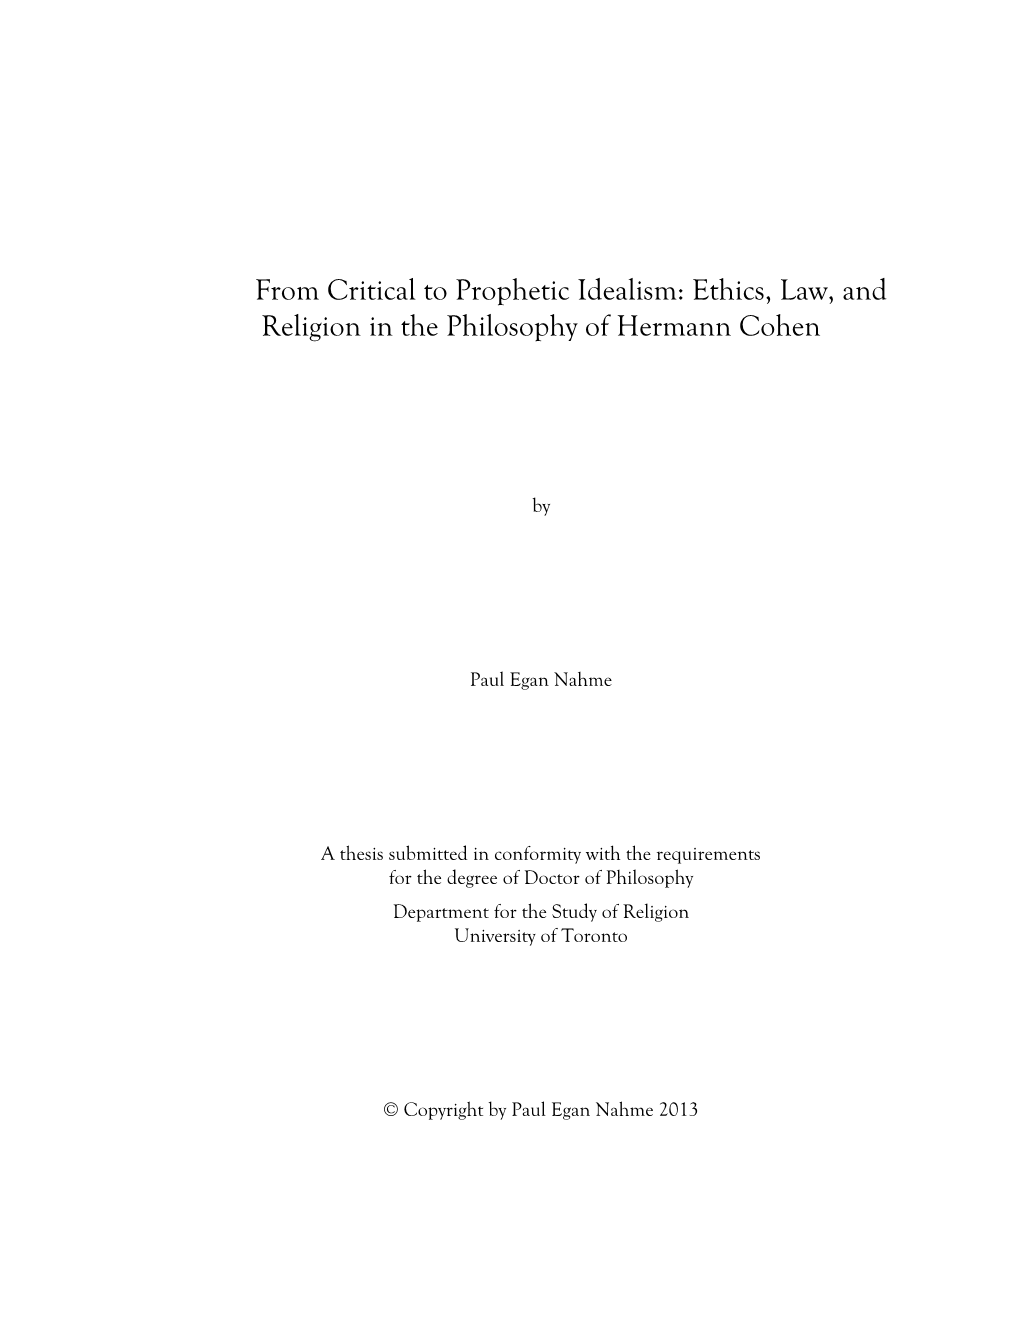 From Critical to Prophetic Idealism: Ethics, Law, and Religion in the Philosophy of Hermann Cohen